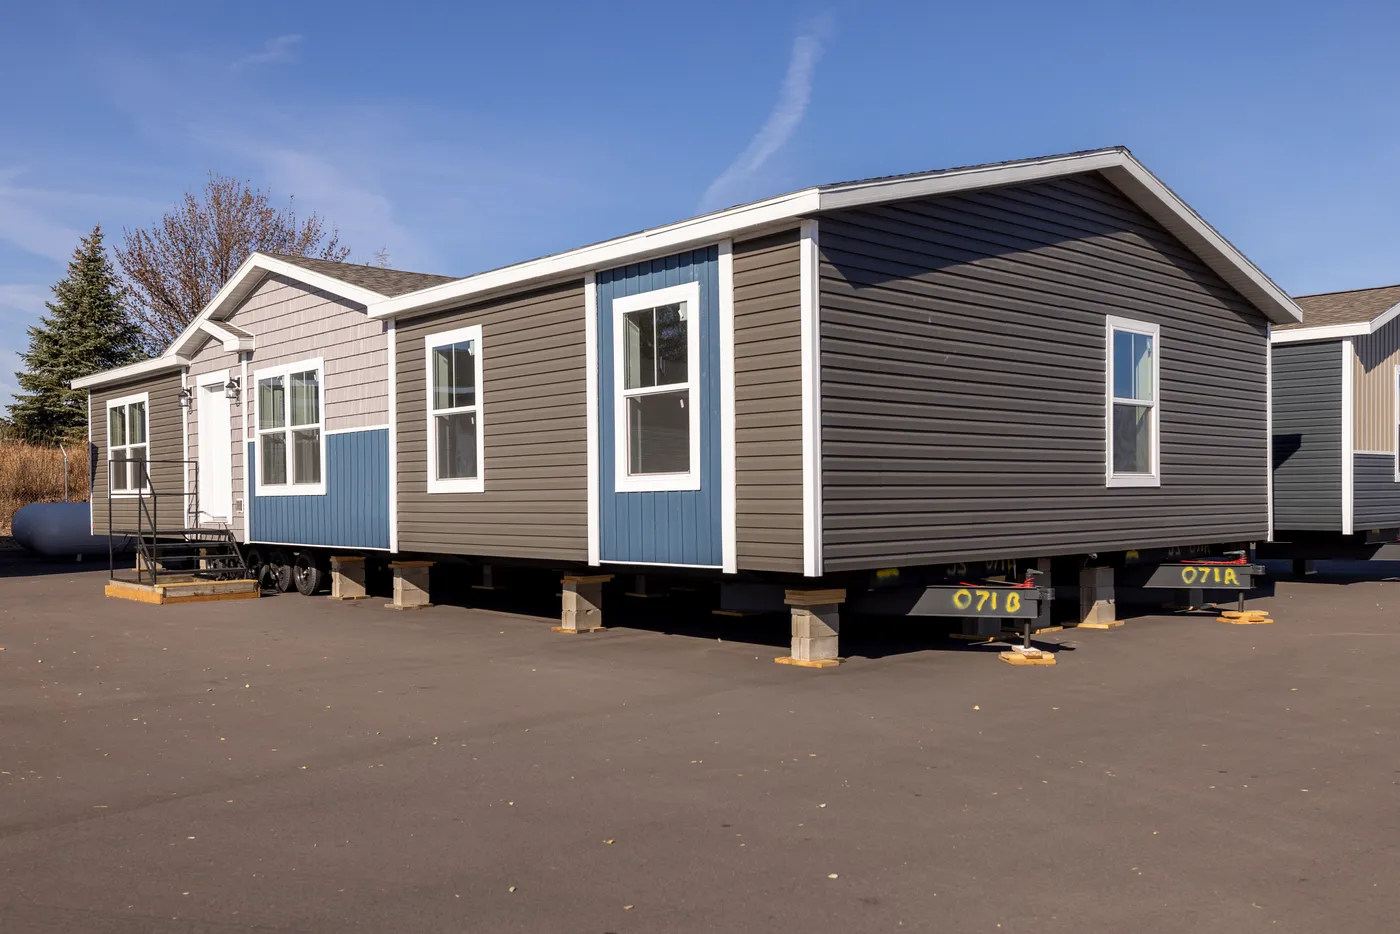 The ROOSEVELT Exterior. This Manufactured Mobile Home features 3 bedrooms and 2 baths.